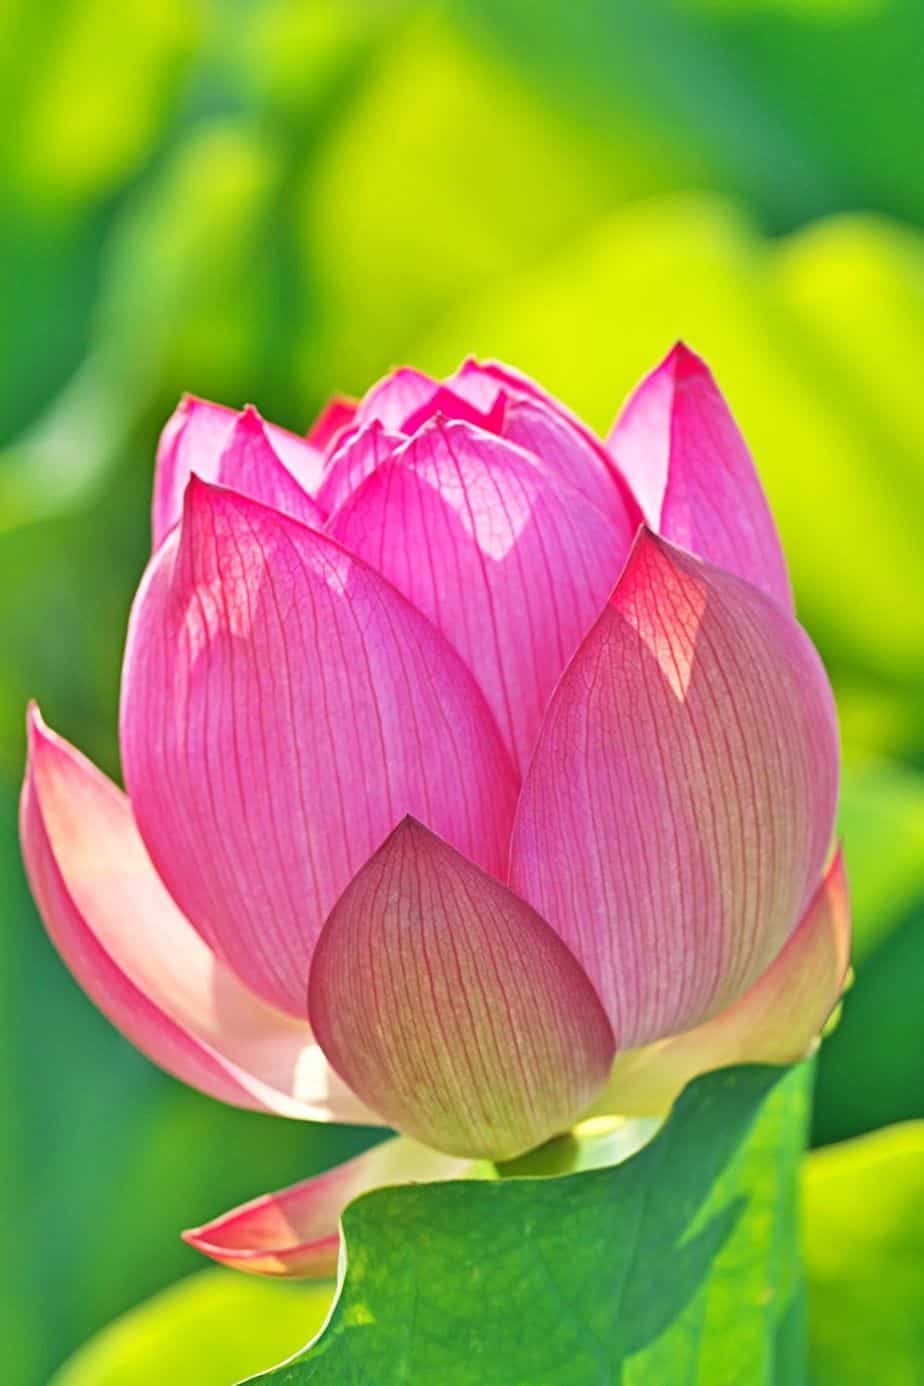 Bowl lotus is the name of the smallest growing lotuses that you can plant on your east-facing balcony